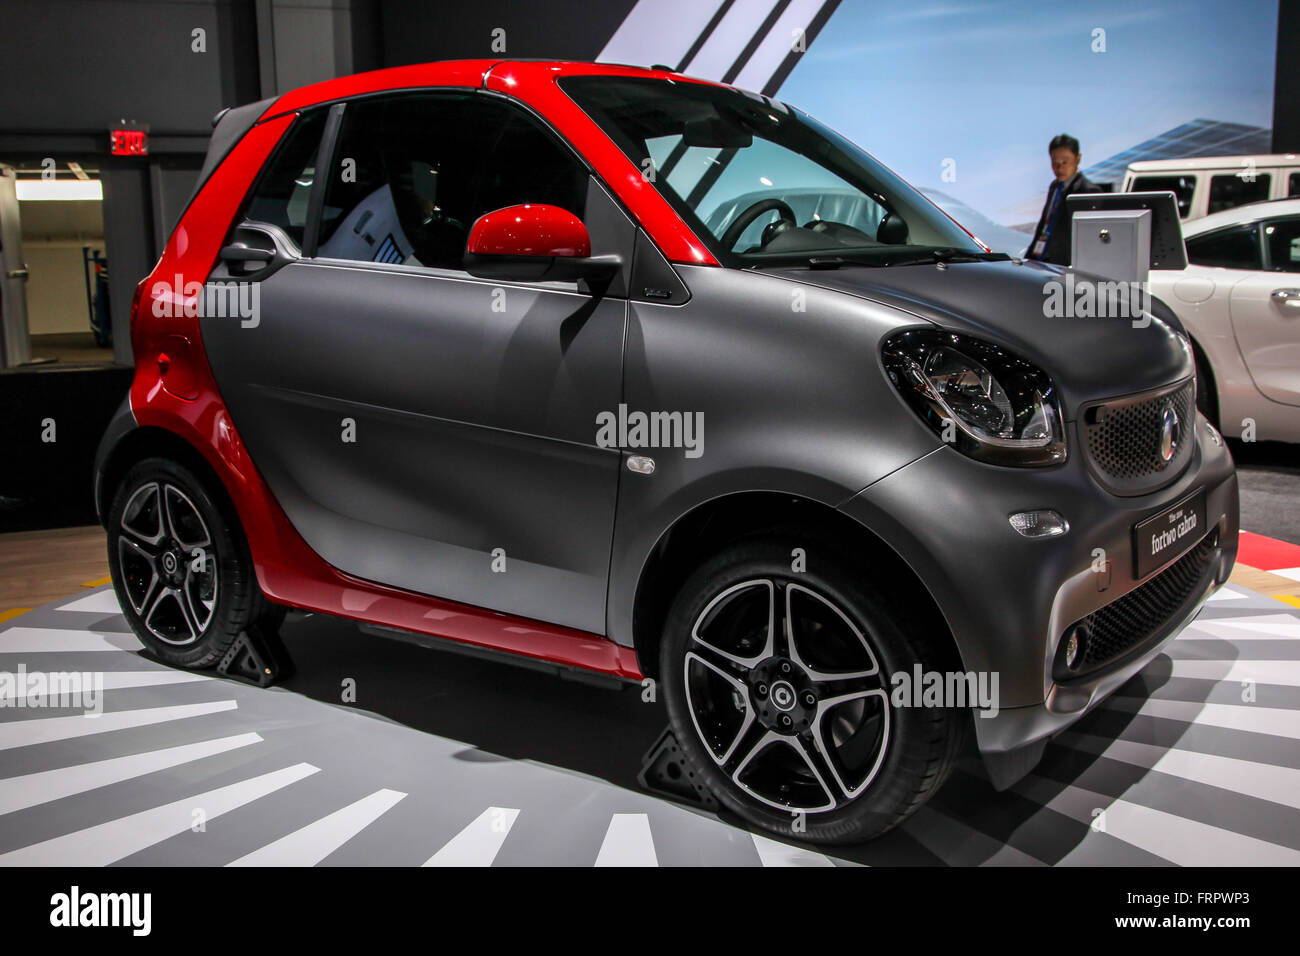 https://c8.alamy.com/comp/FRPWP3/new-york-ny-usa-23-march-2016-a-mercedes-smart-fortwo-cabrio-shown-FRPWP3.jpg